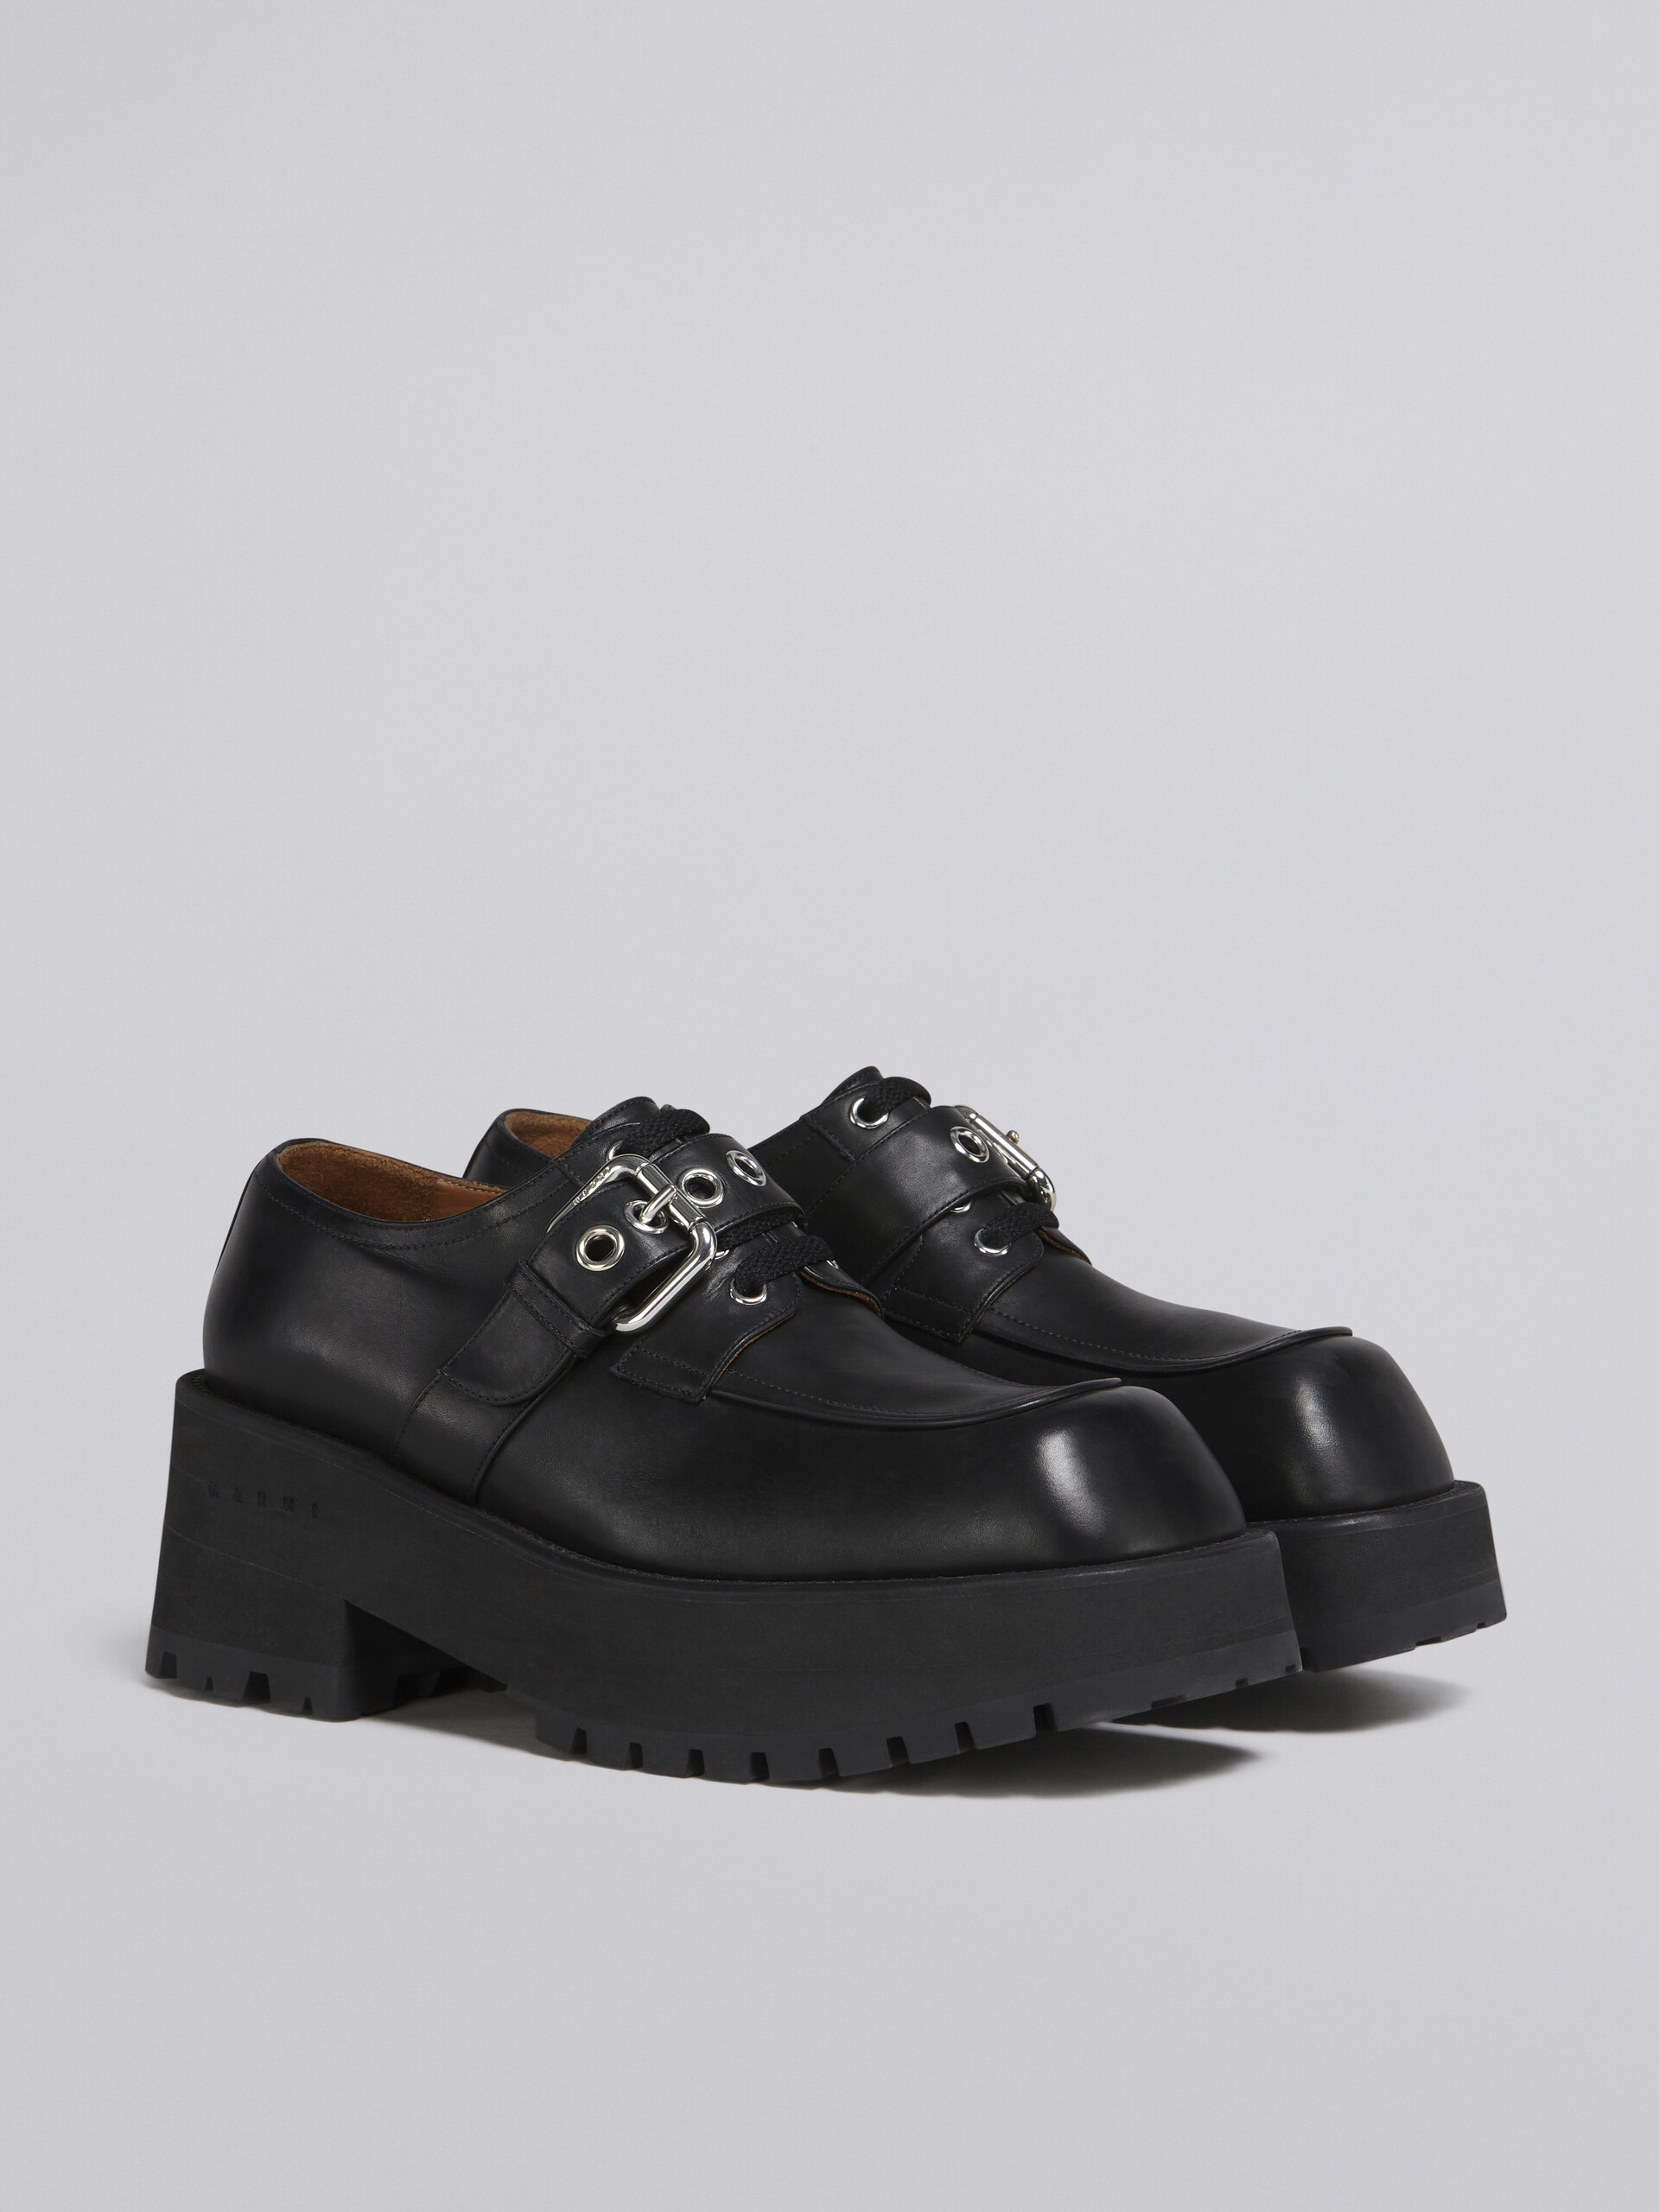 Black soft calf leather moccasin - Lace-ups - Image 2